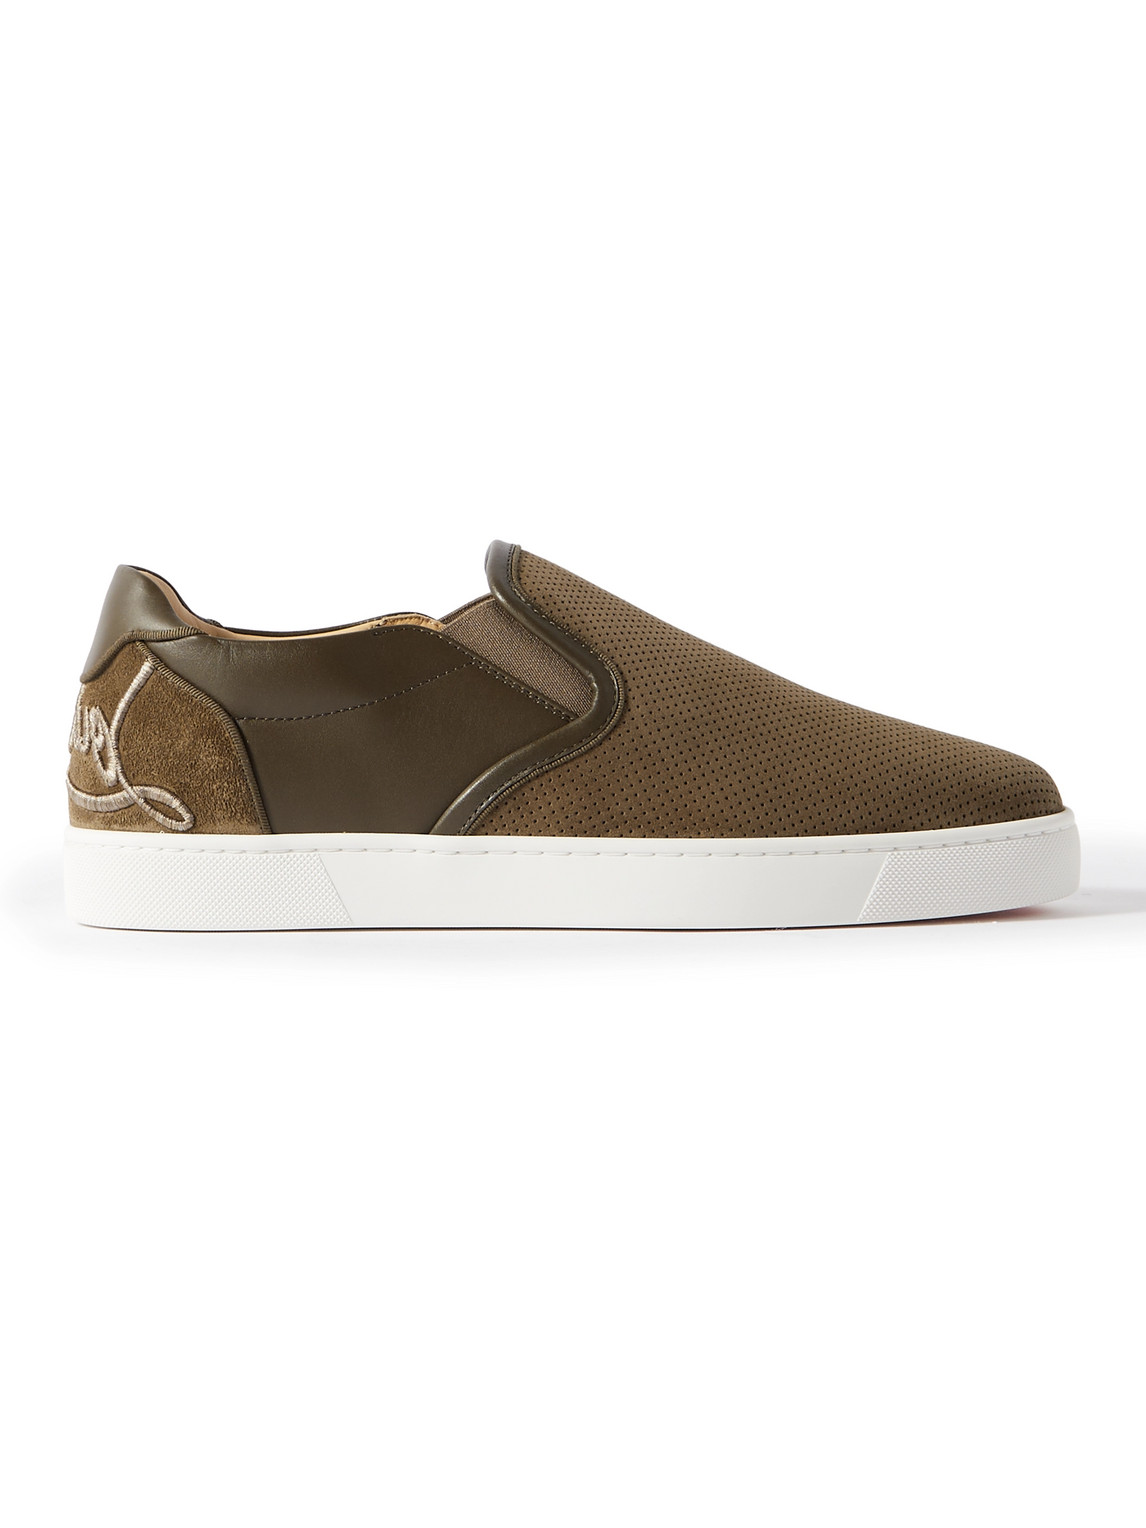 Christian Louboutin Fun Sailor Leather-trimmed Perforated Suede Slip-on Trainers In Green